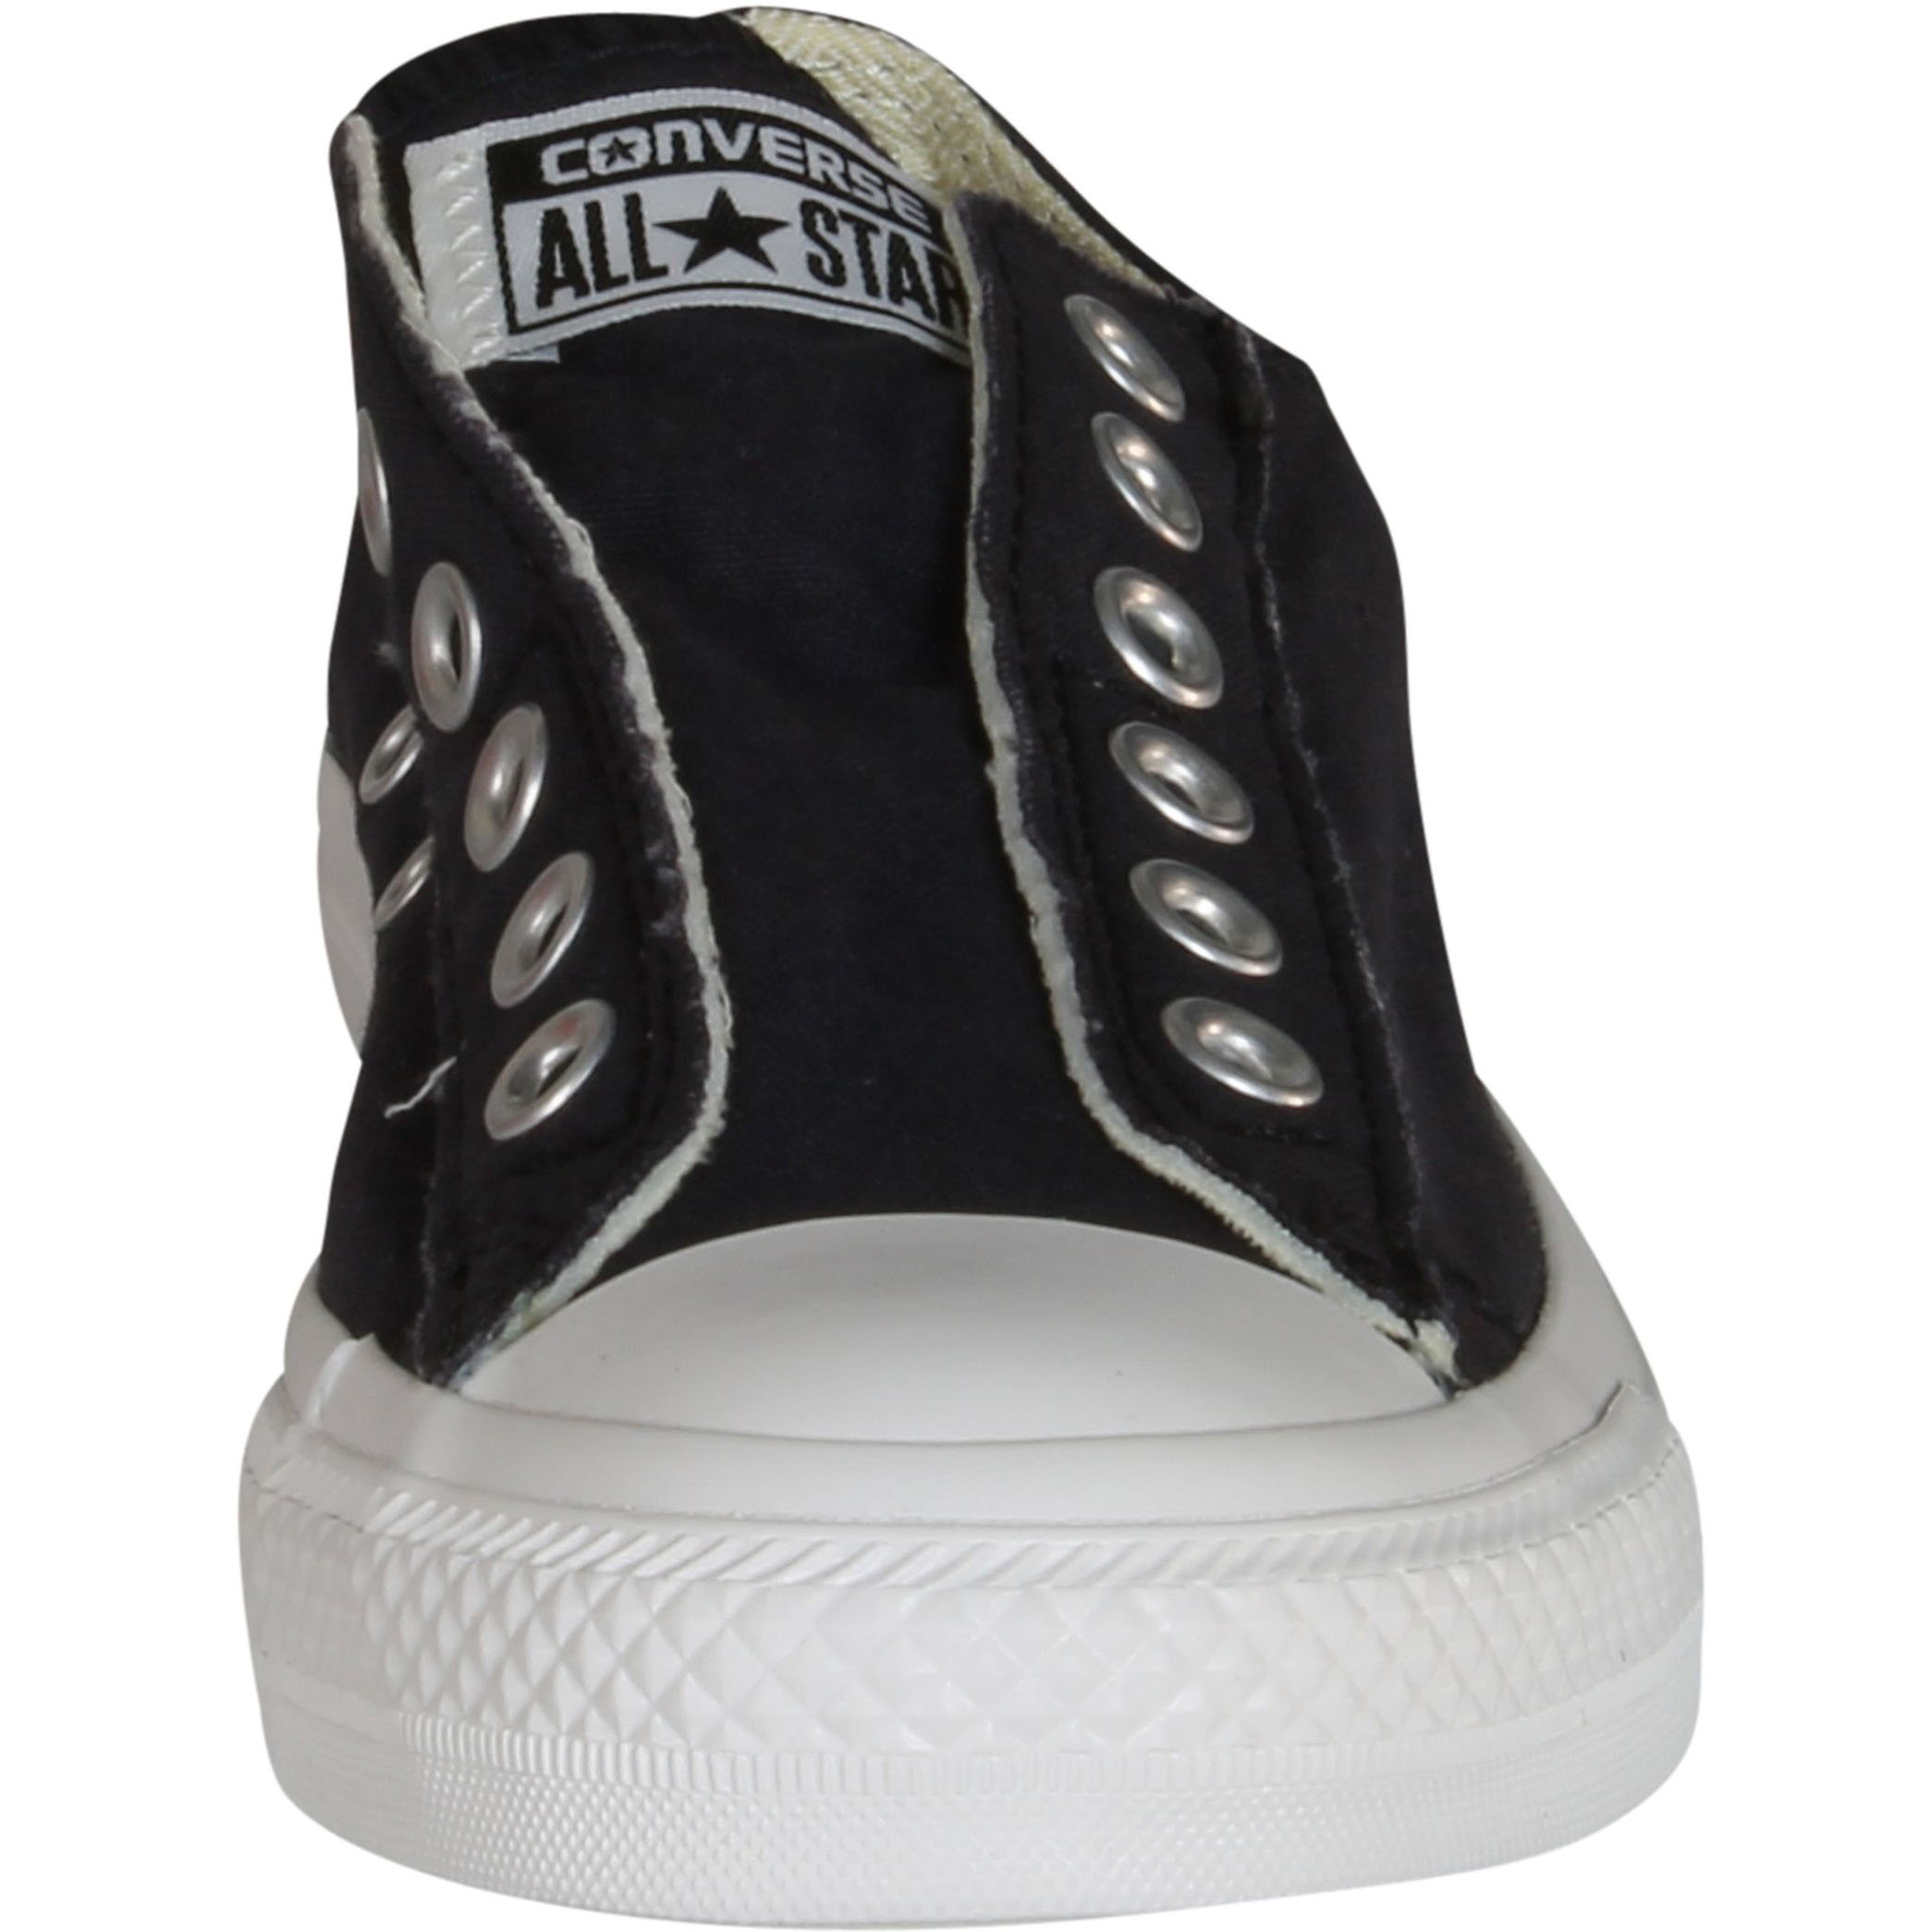 Converse Slip On Chuck Taylor - image 3 of 4